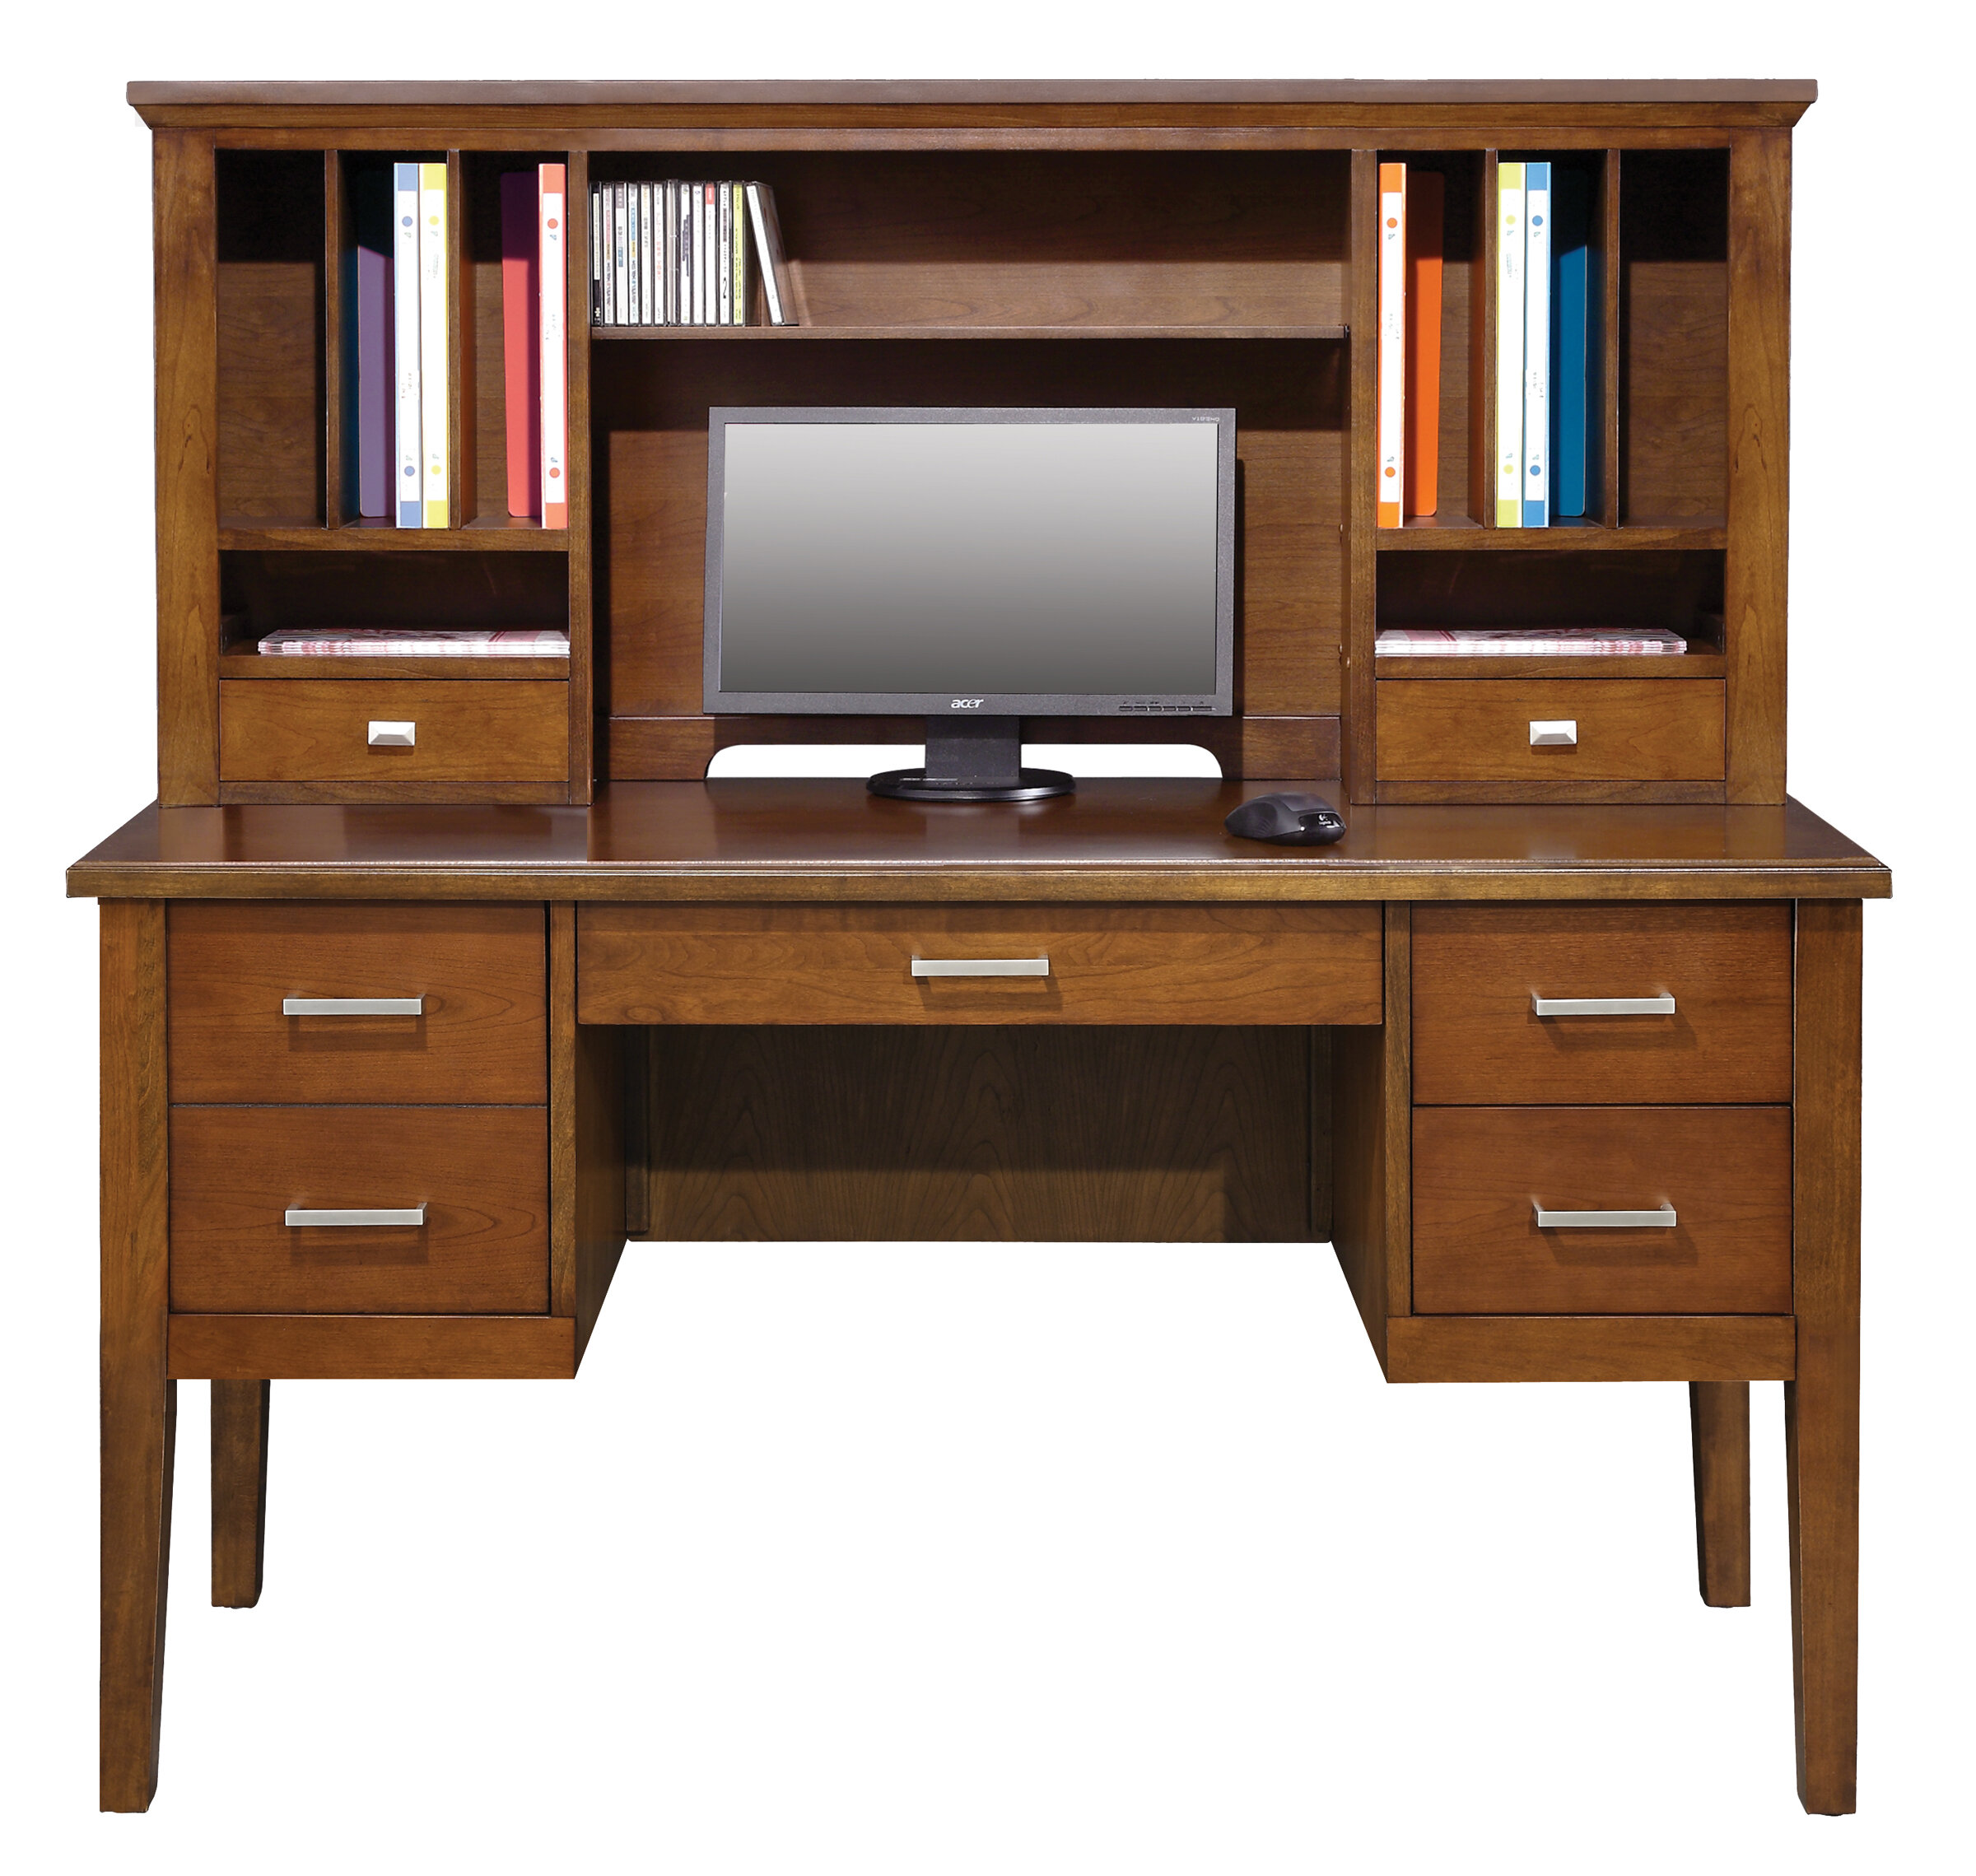 Darby Home Co Eaton Solid Wood Desk With Hutch Reviews Wayfair